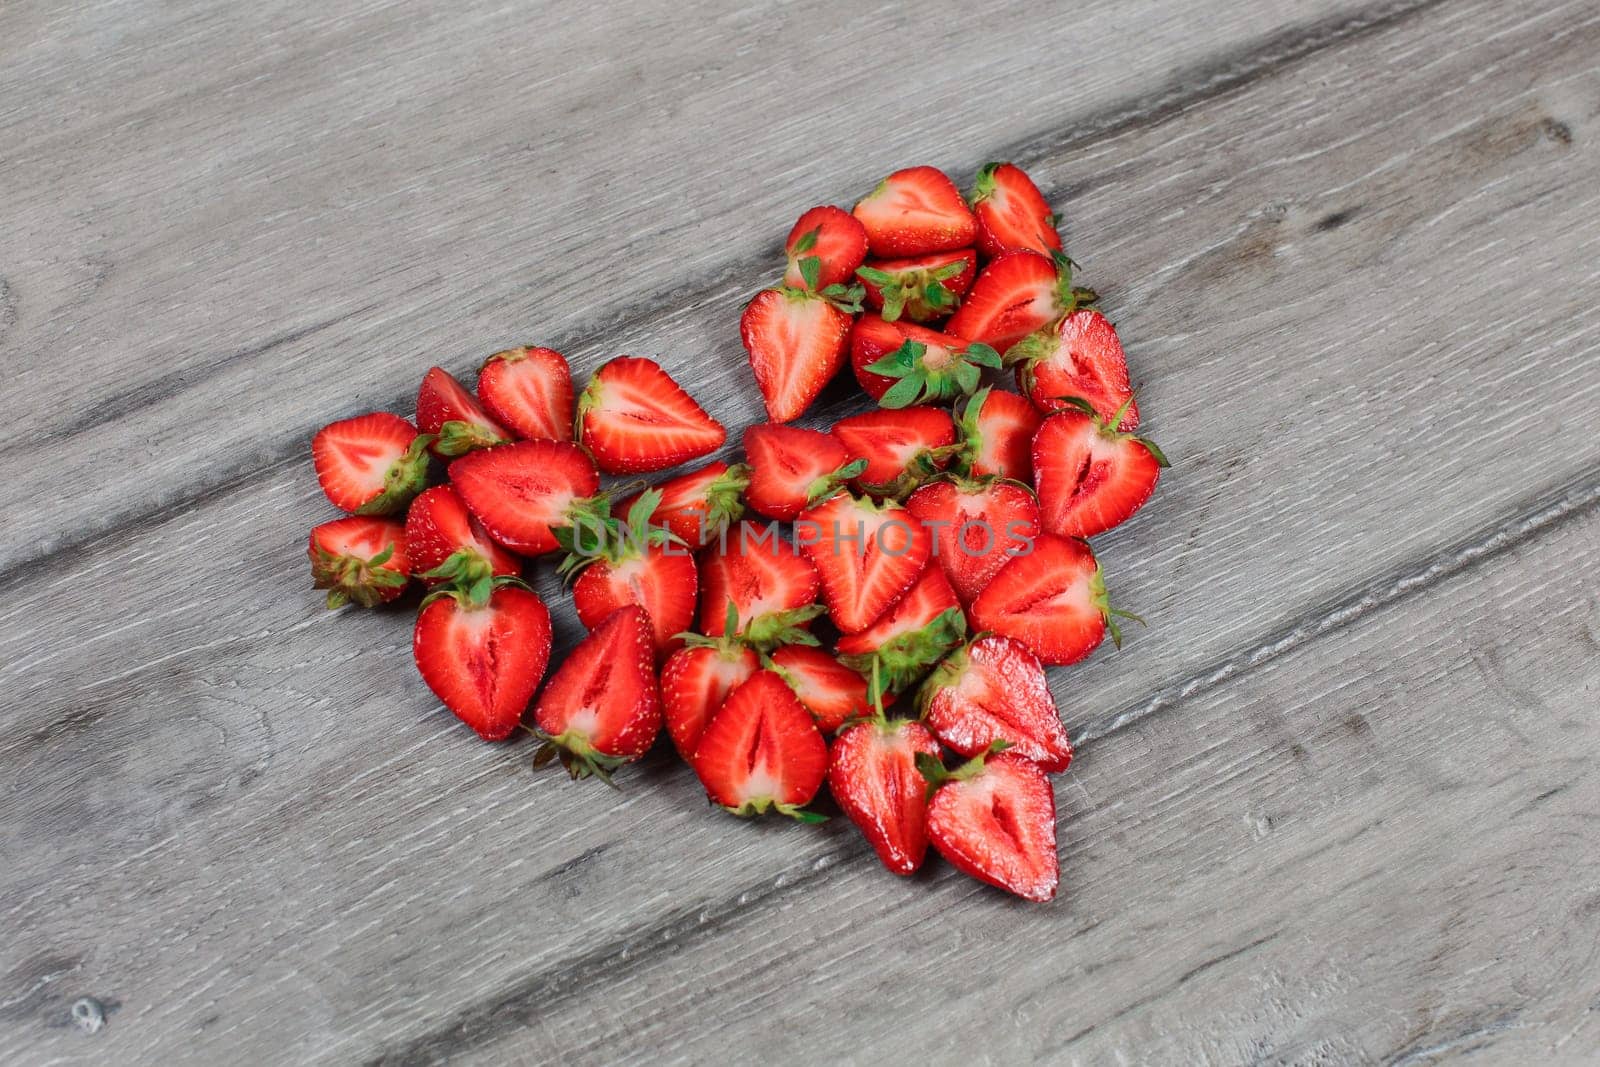 Strawberries cut in half, arranged to shape of heart, placed on gray wood desk. by Ivanko